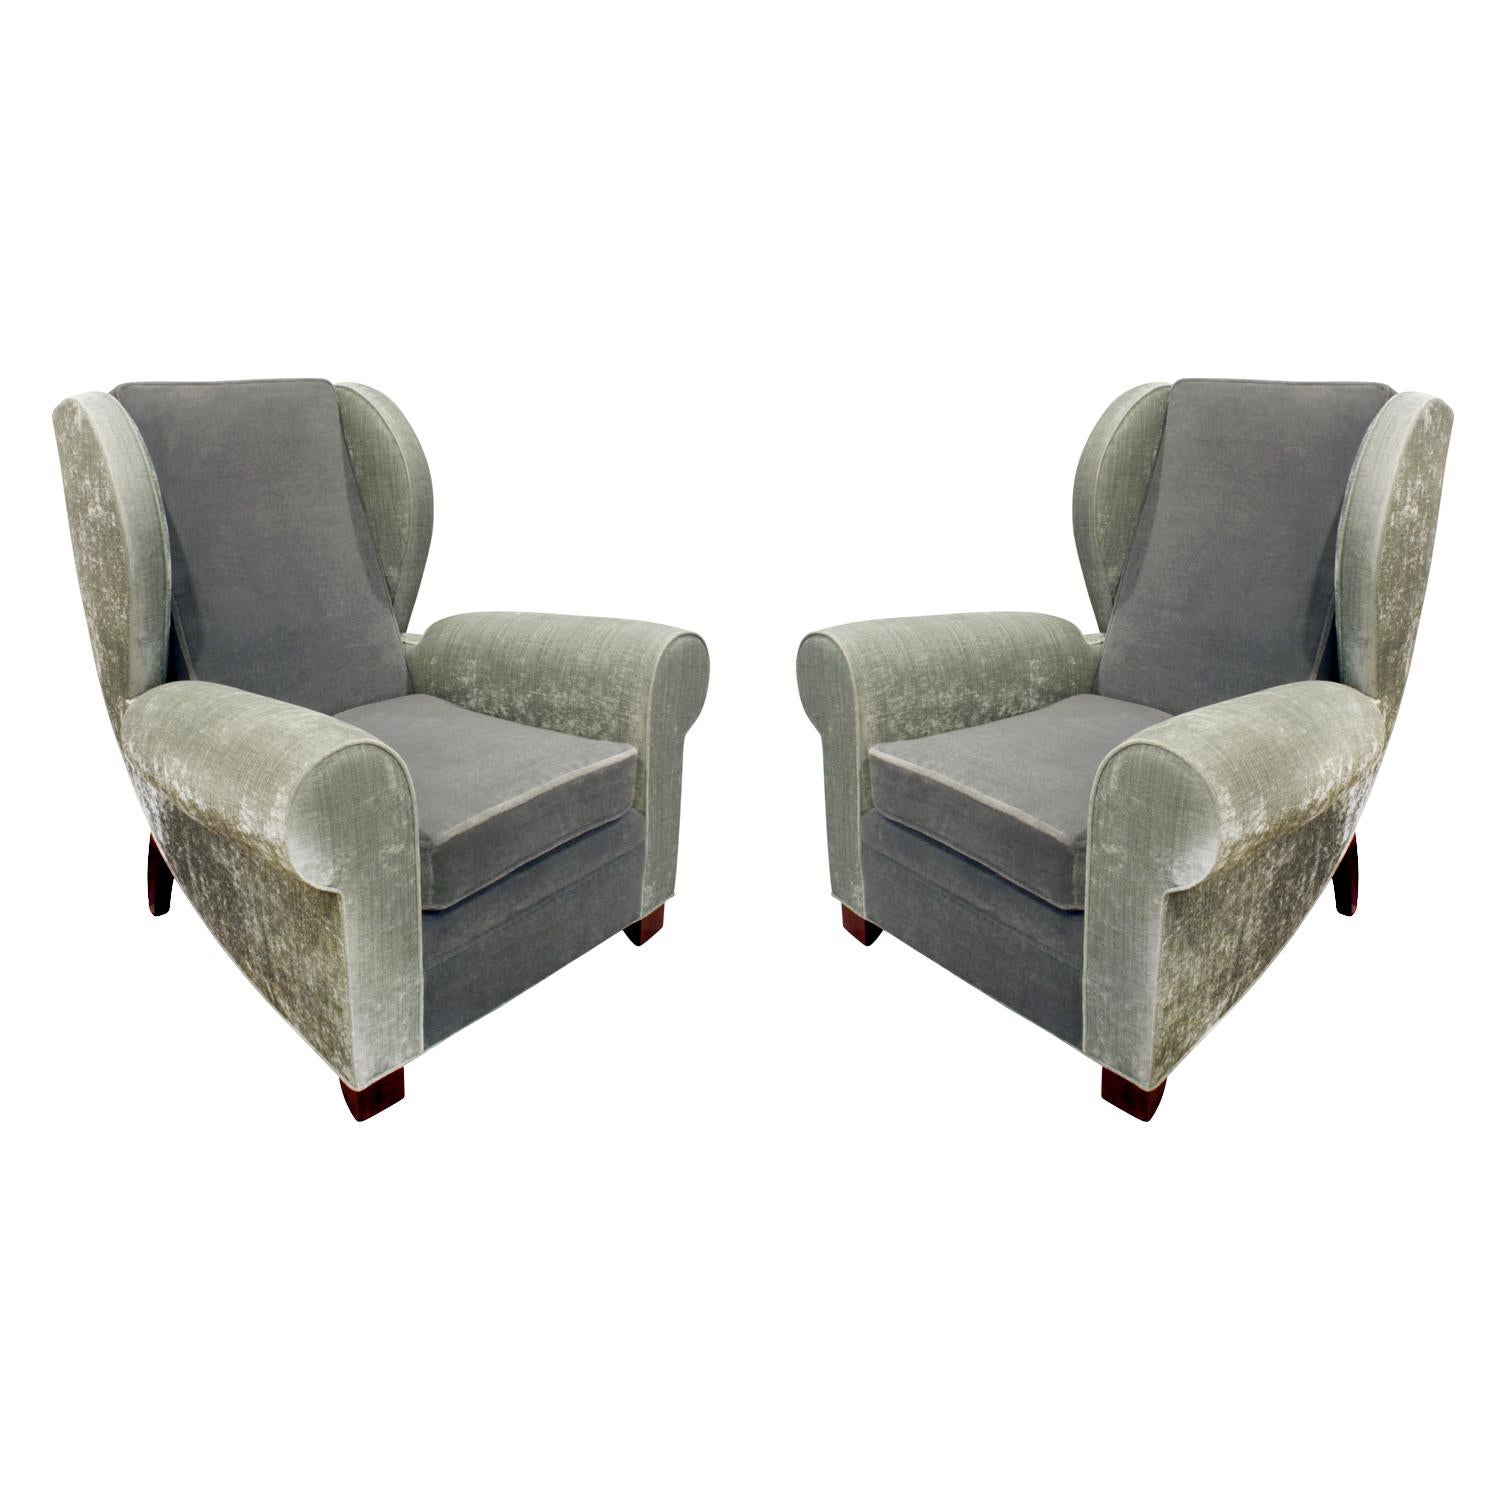 Pair of Large Sculptural French Wing Chairs, 1930s